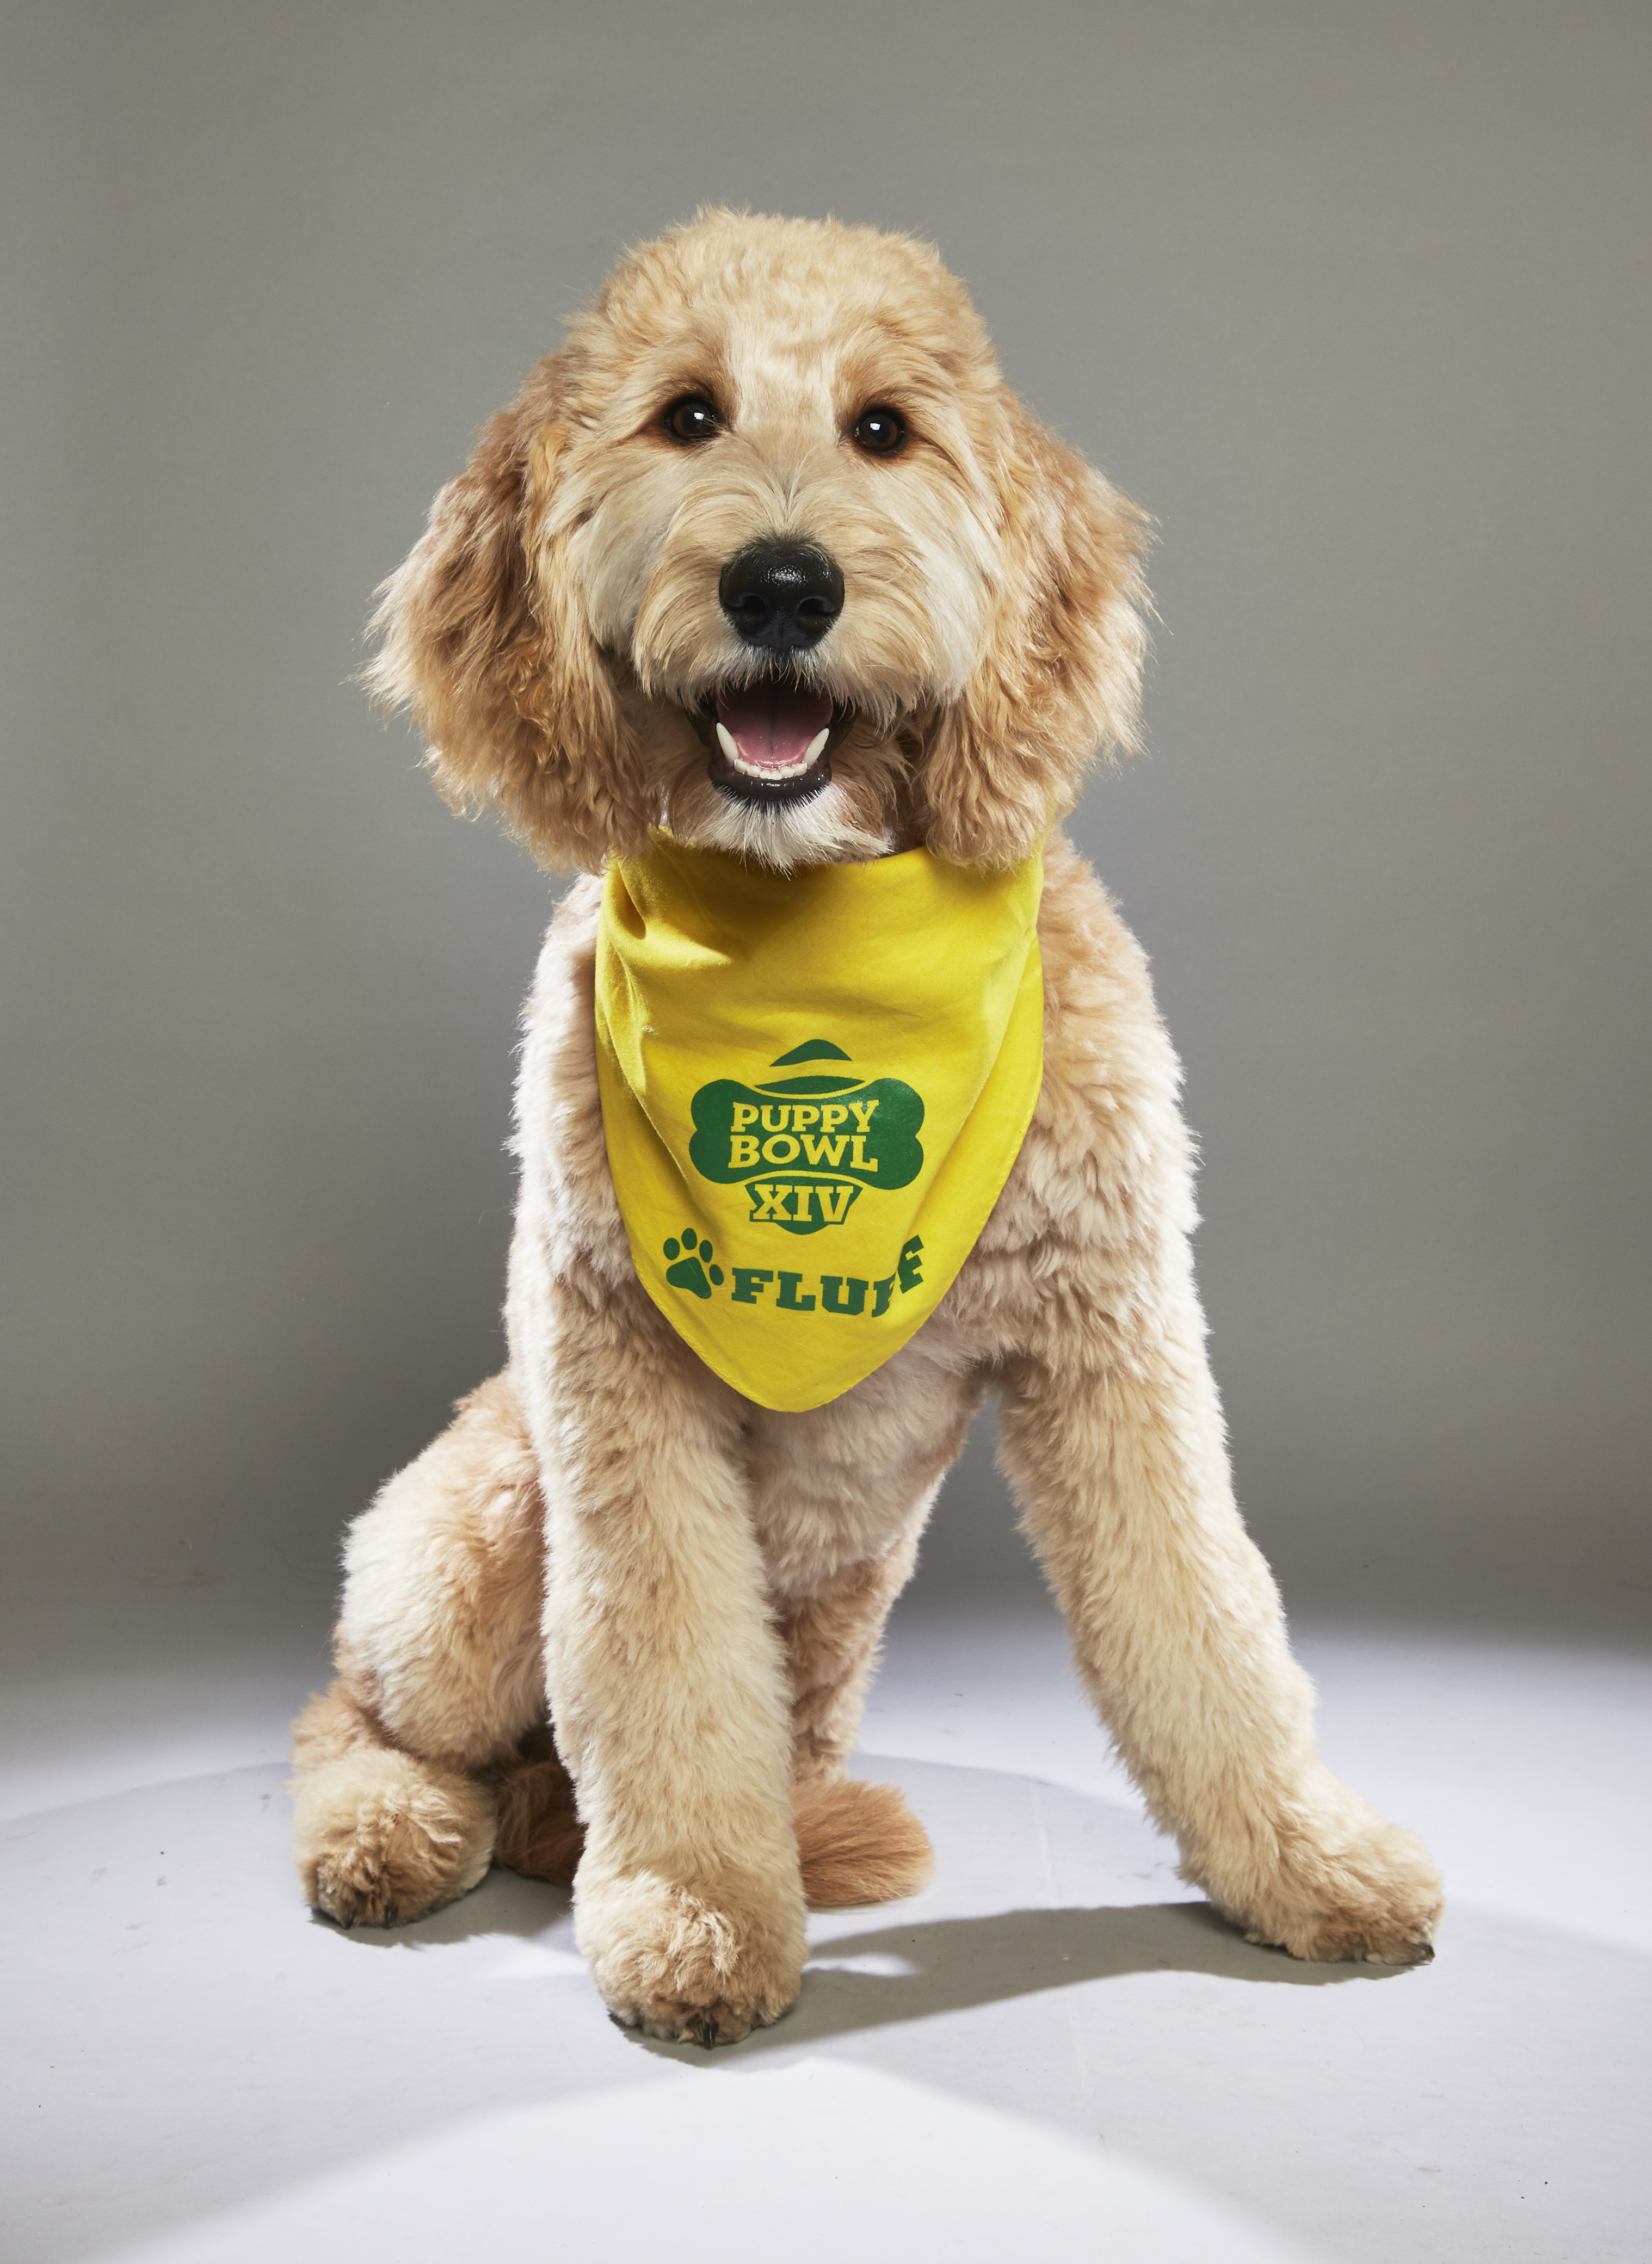 The 2018 Puppy Bowl Puppies Are Here & The Starting Lineup Is Too ...